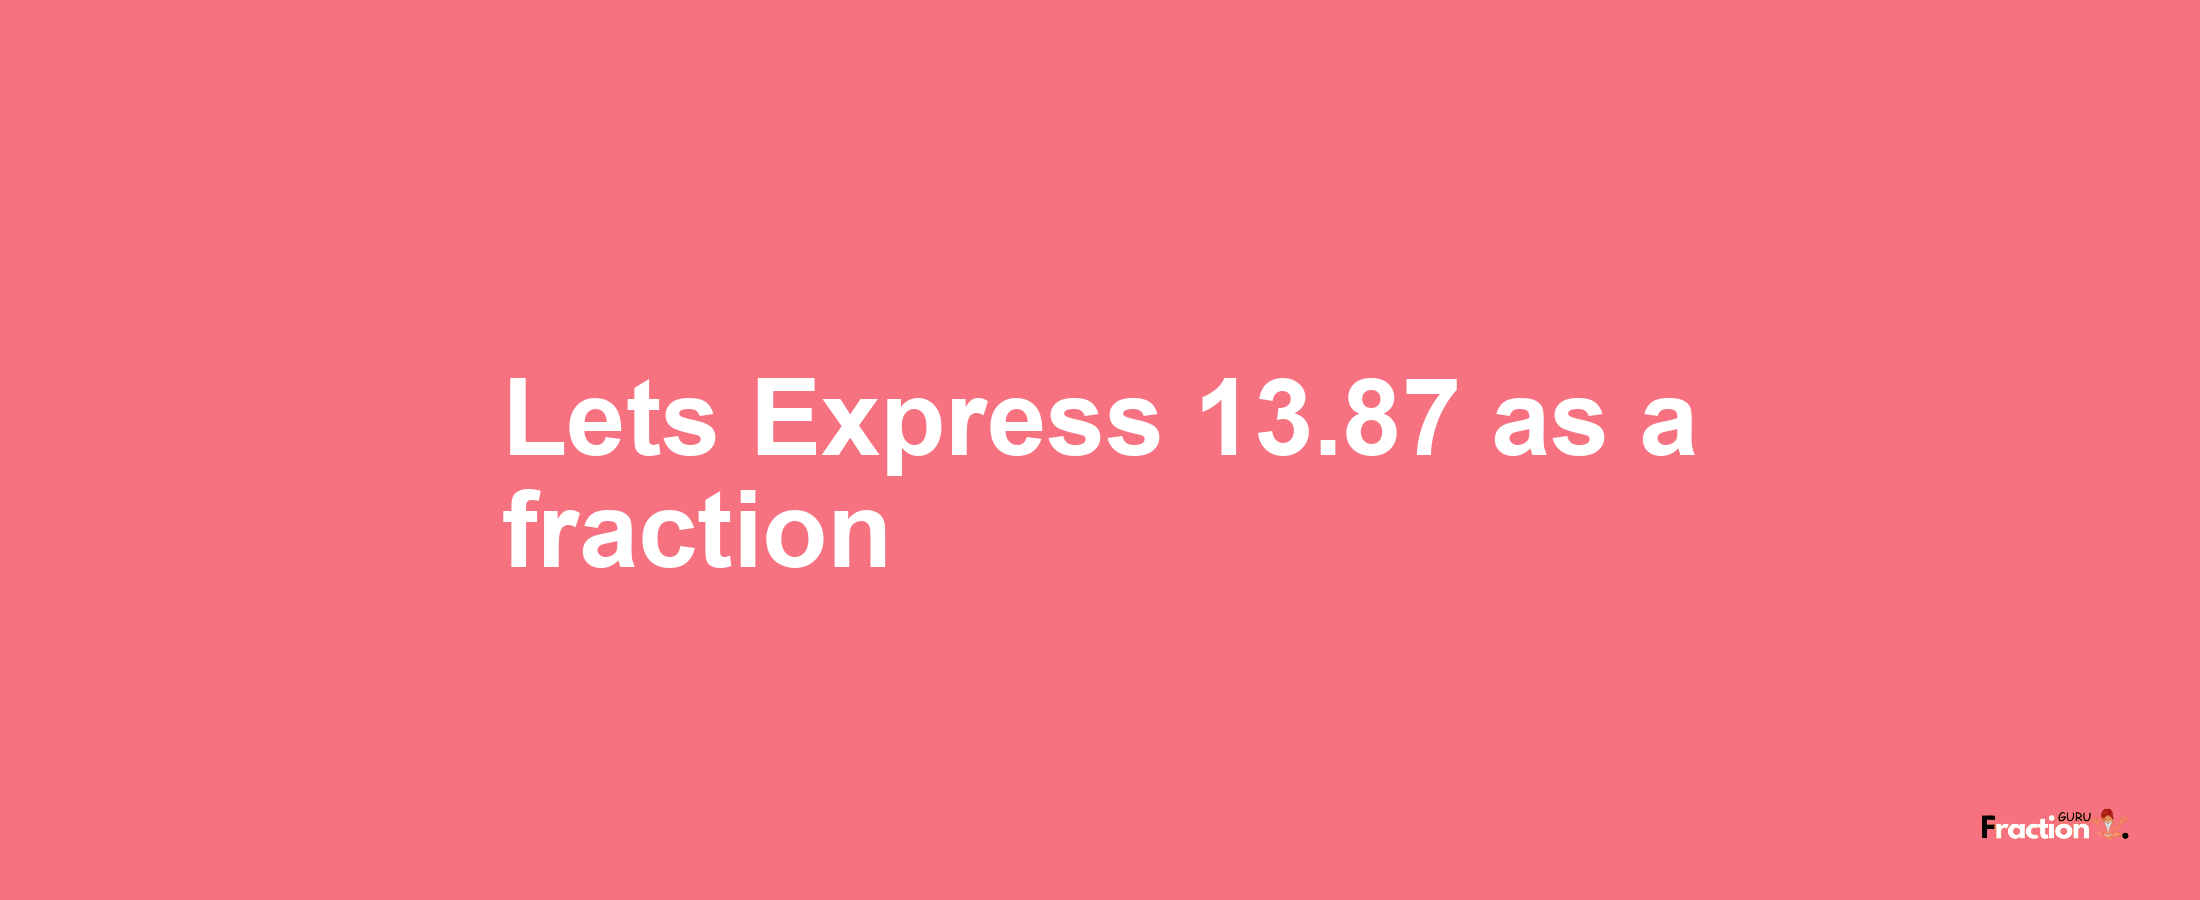 Lets Express 13.87 as afraction